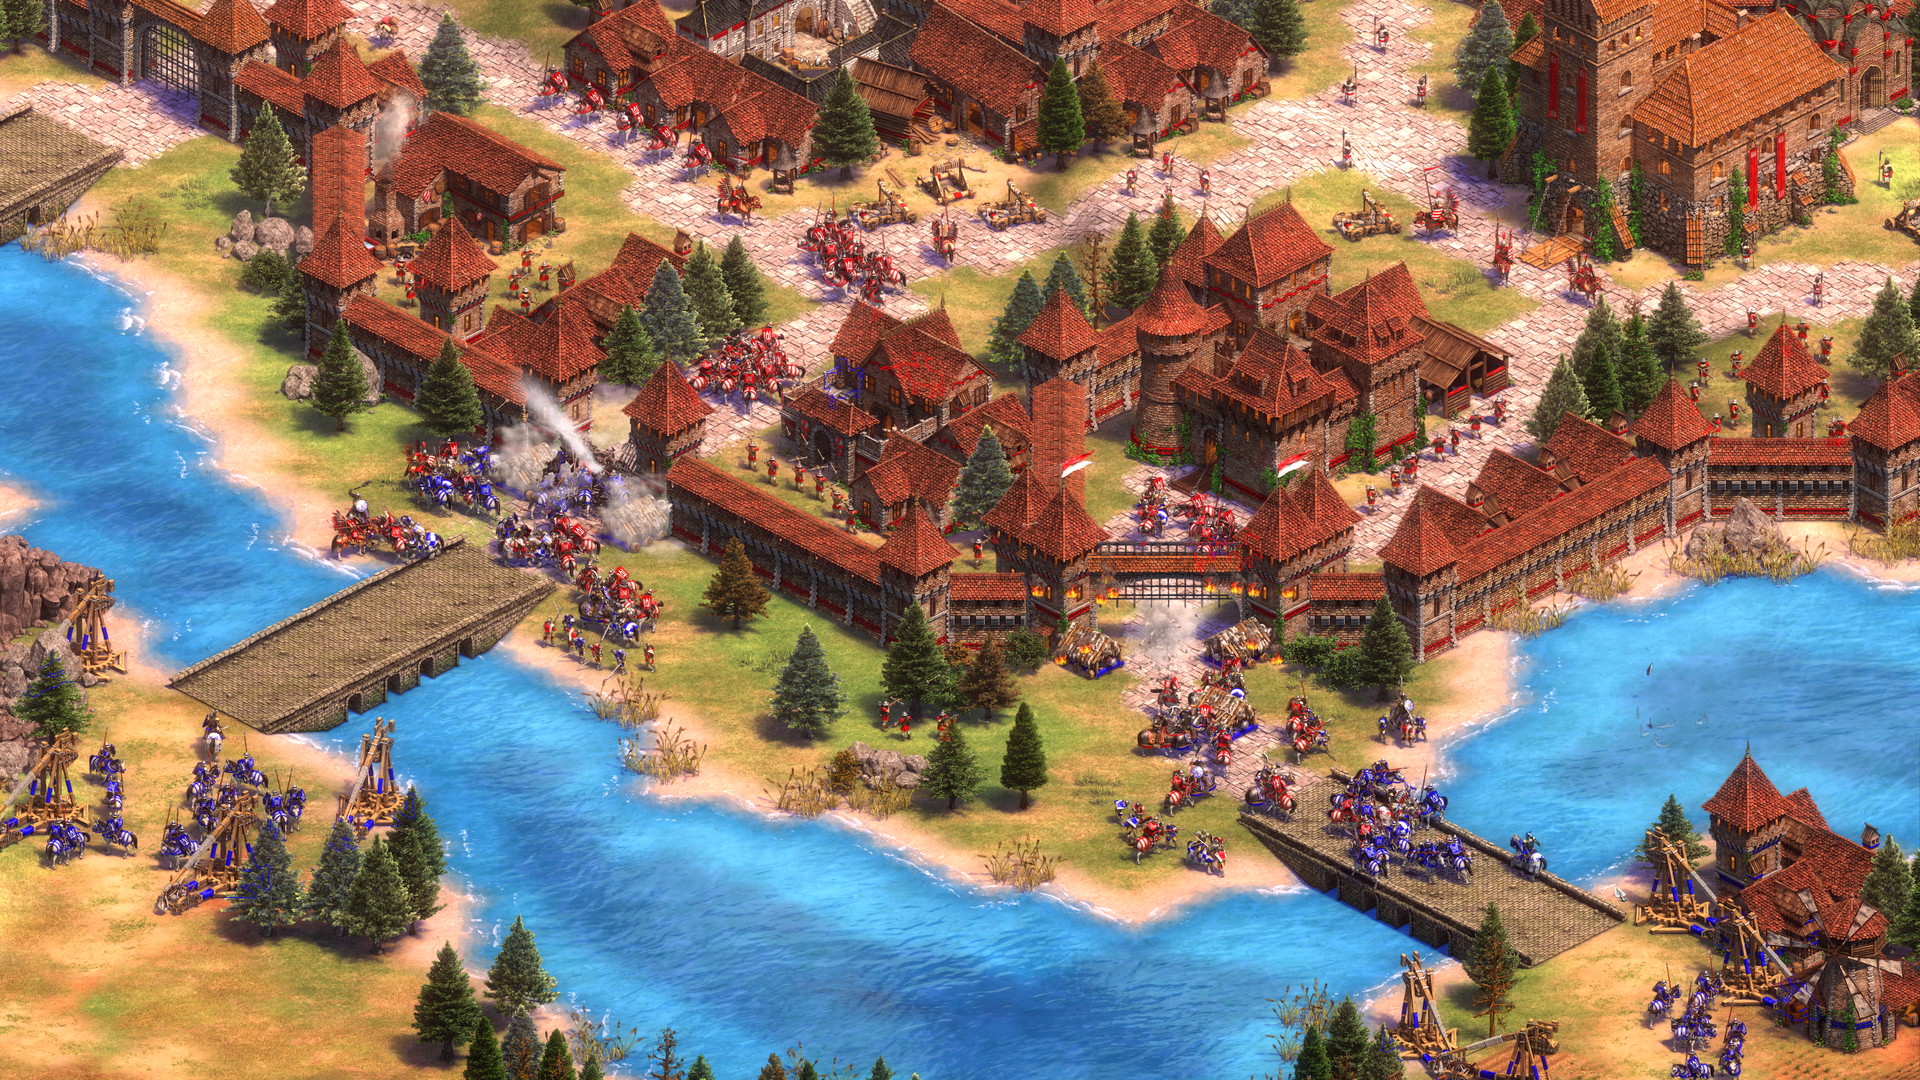 Age of Empires II: Definitive Edition - screenshot 6